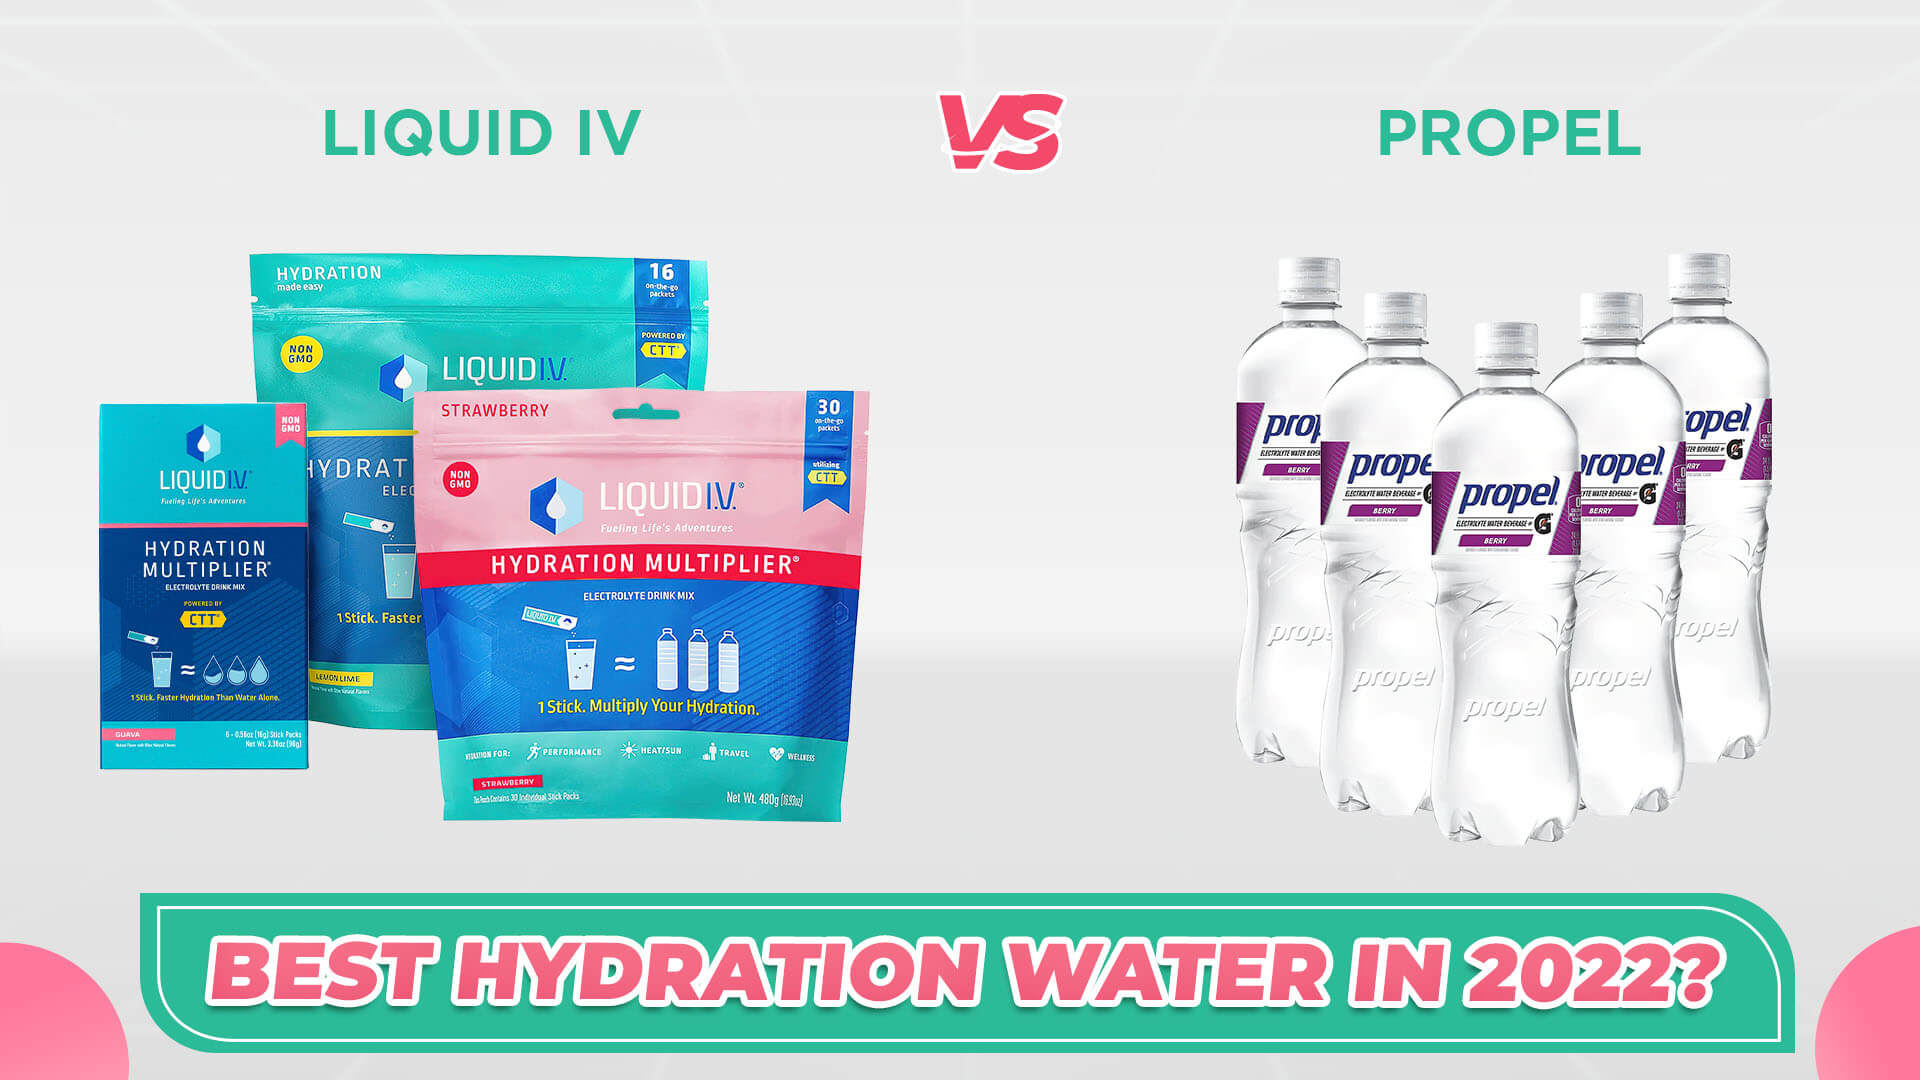 Liquid IV Vs Propel: Which Hydration Water Is Better?